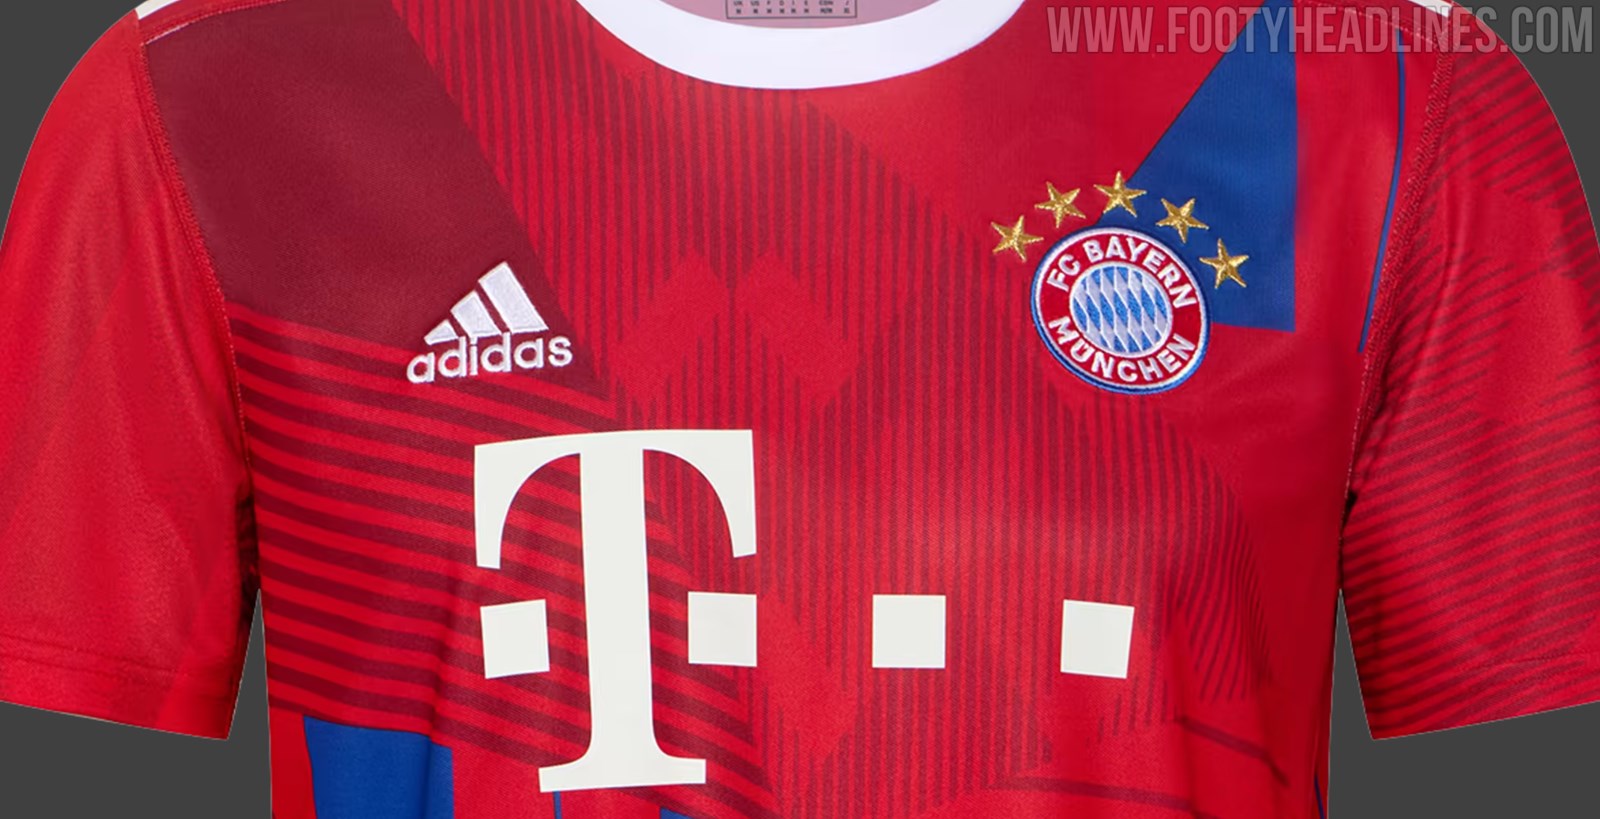 Adidas Bayern München 10 Years Champion Kit Released - Available Again ...